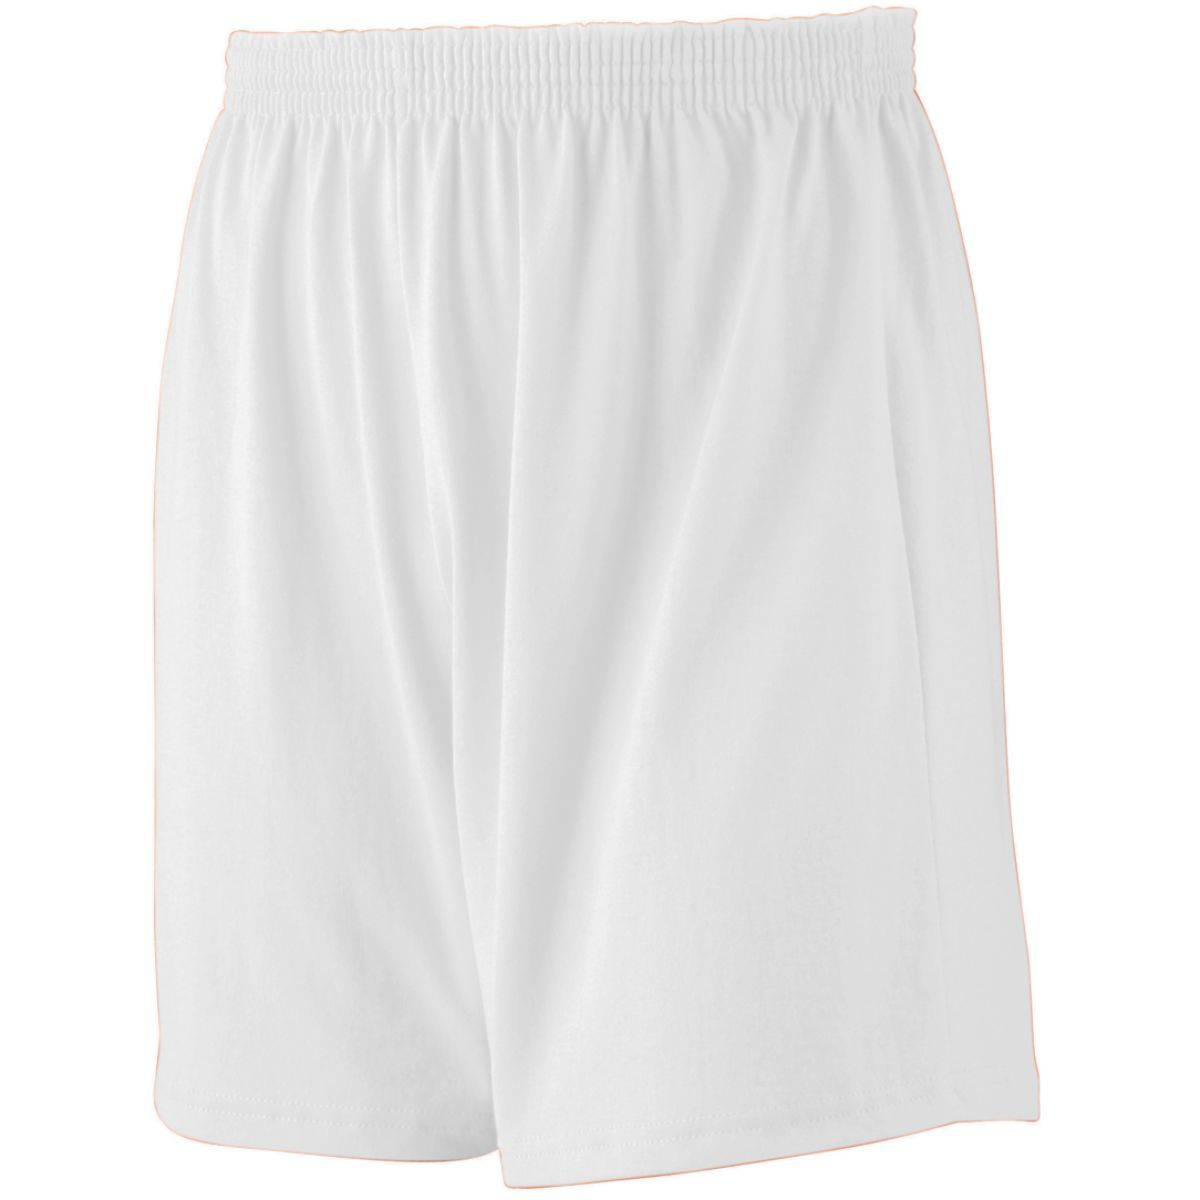 Augusta Sportswear Jersey Knit Shorts in White  -Part of the Adult, Adult-Shorts, Augusta-Products product lines at KanaleyCreations.com